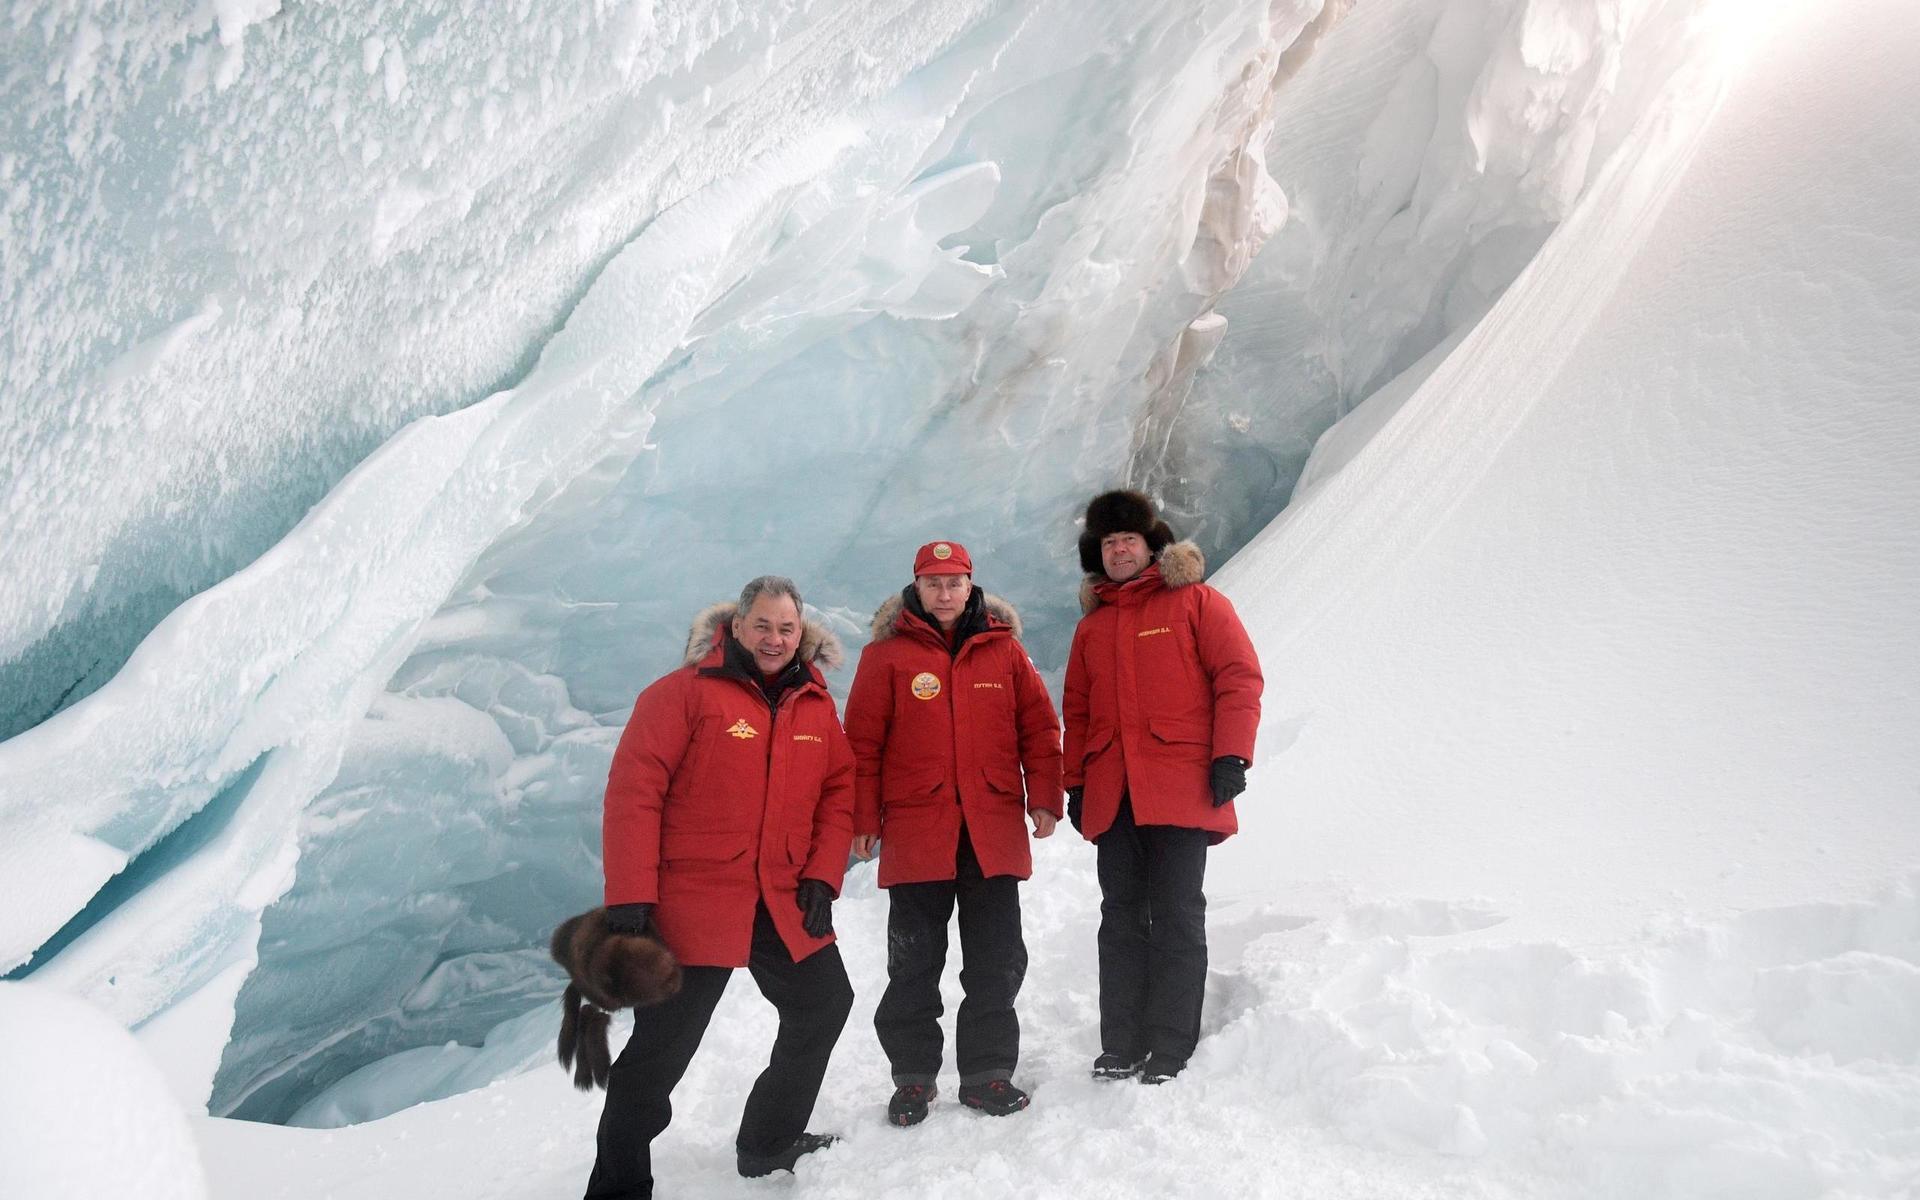 Russian President Vladimir Putin, center, Prime Minister Dmitry Medvedev, right, and Defense Minister Sergei Shoigu, pose for a photo as they inspect a cavity in a glacier on the Arctic Franz Josef Land archipelago in Arctic Russia, Wednesday, March 29, 2017. Russia has sought to strengthen its foothold in the Arctic amid intensifying rivalry for the region&apos;s rich natural resources between polar countries.(Alexei Druzhinin, Sputnik, Kremlin Pool Photo via AP)